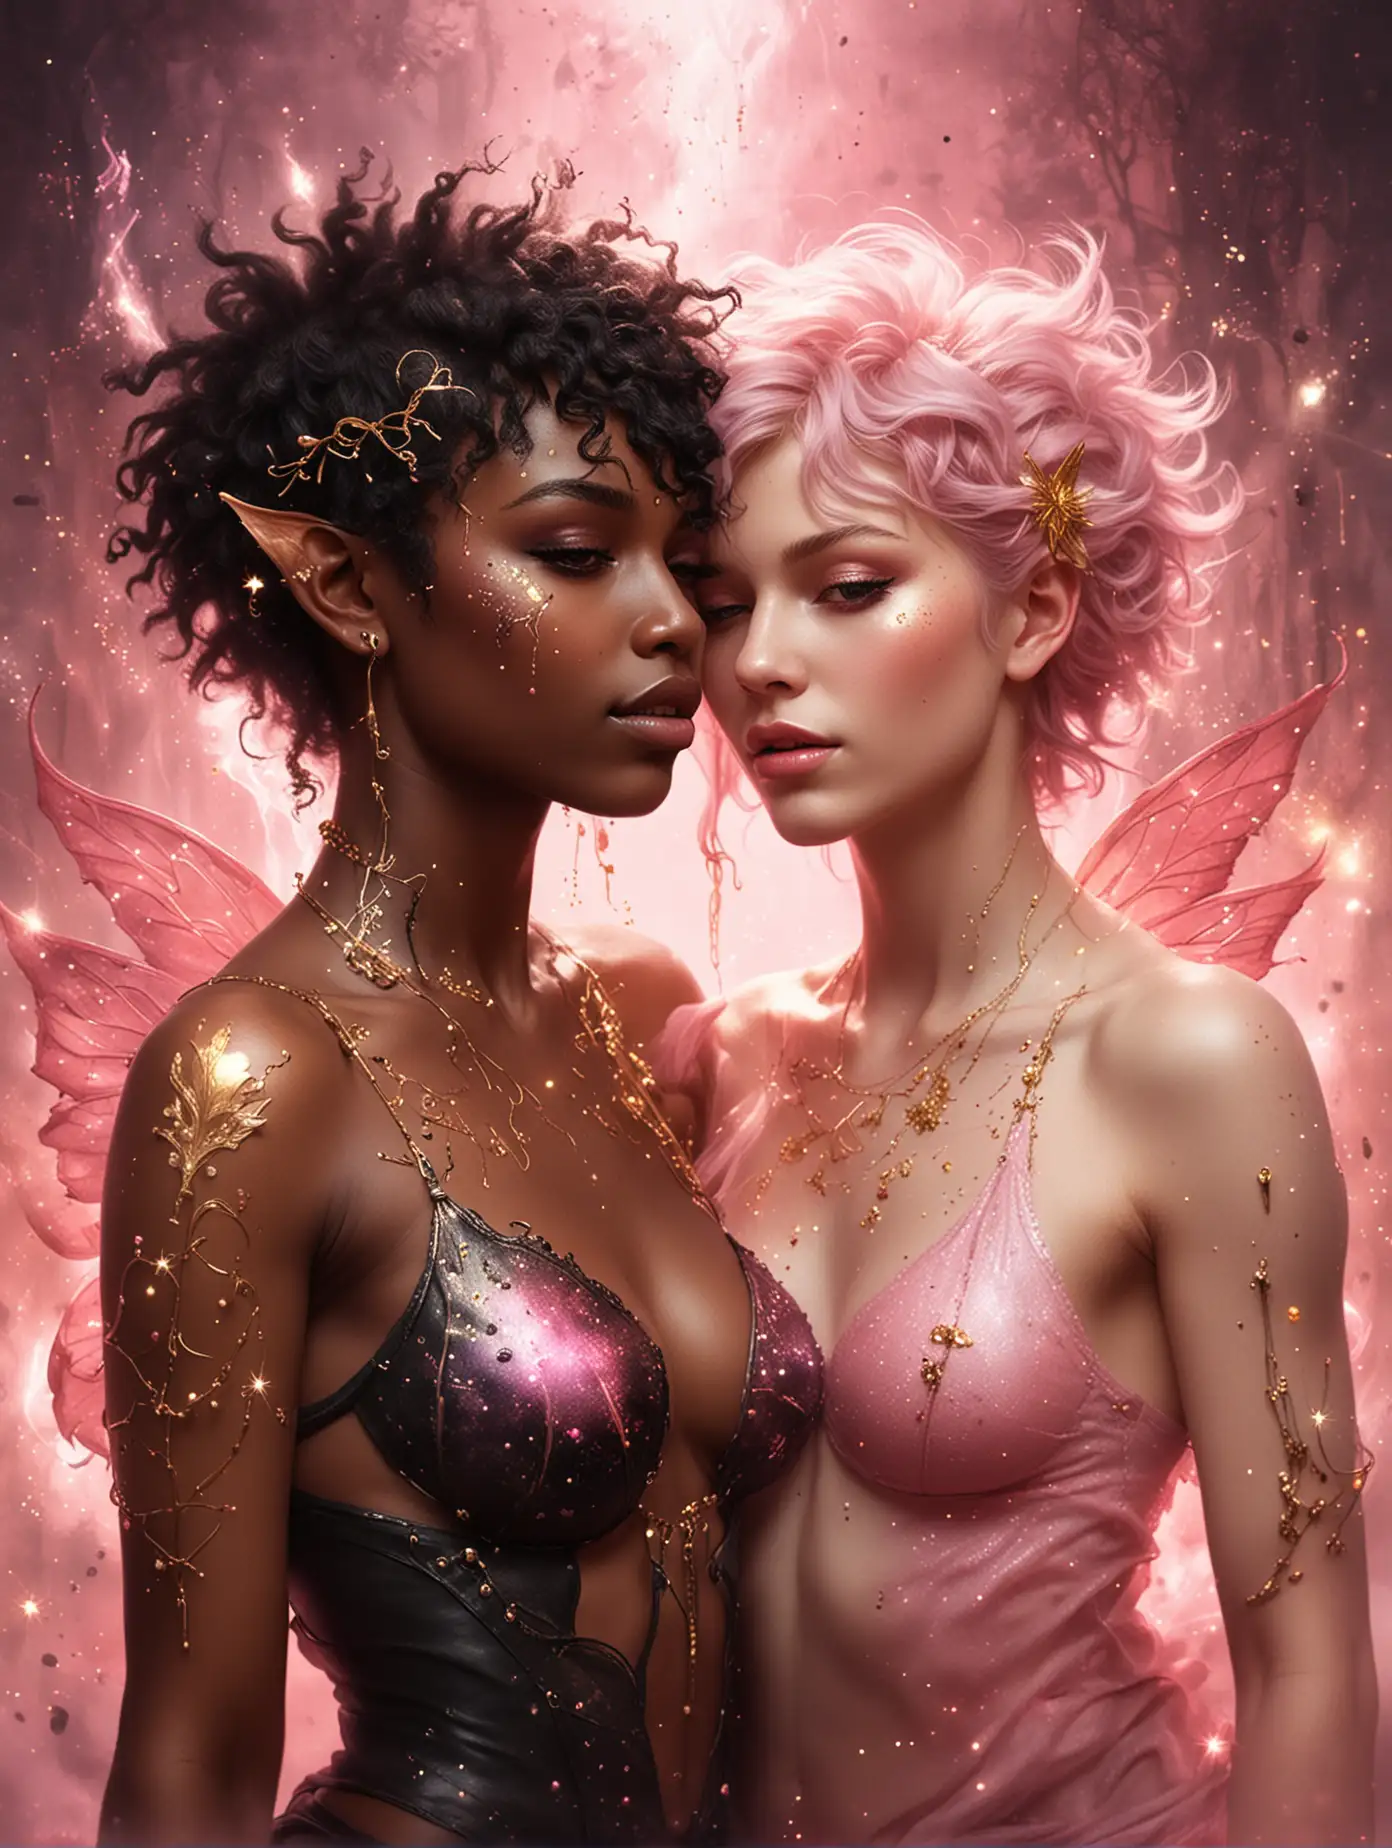 Sensual Lesbian Fae Embrace in Enchanting Pink Fog with Golden Sparks